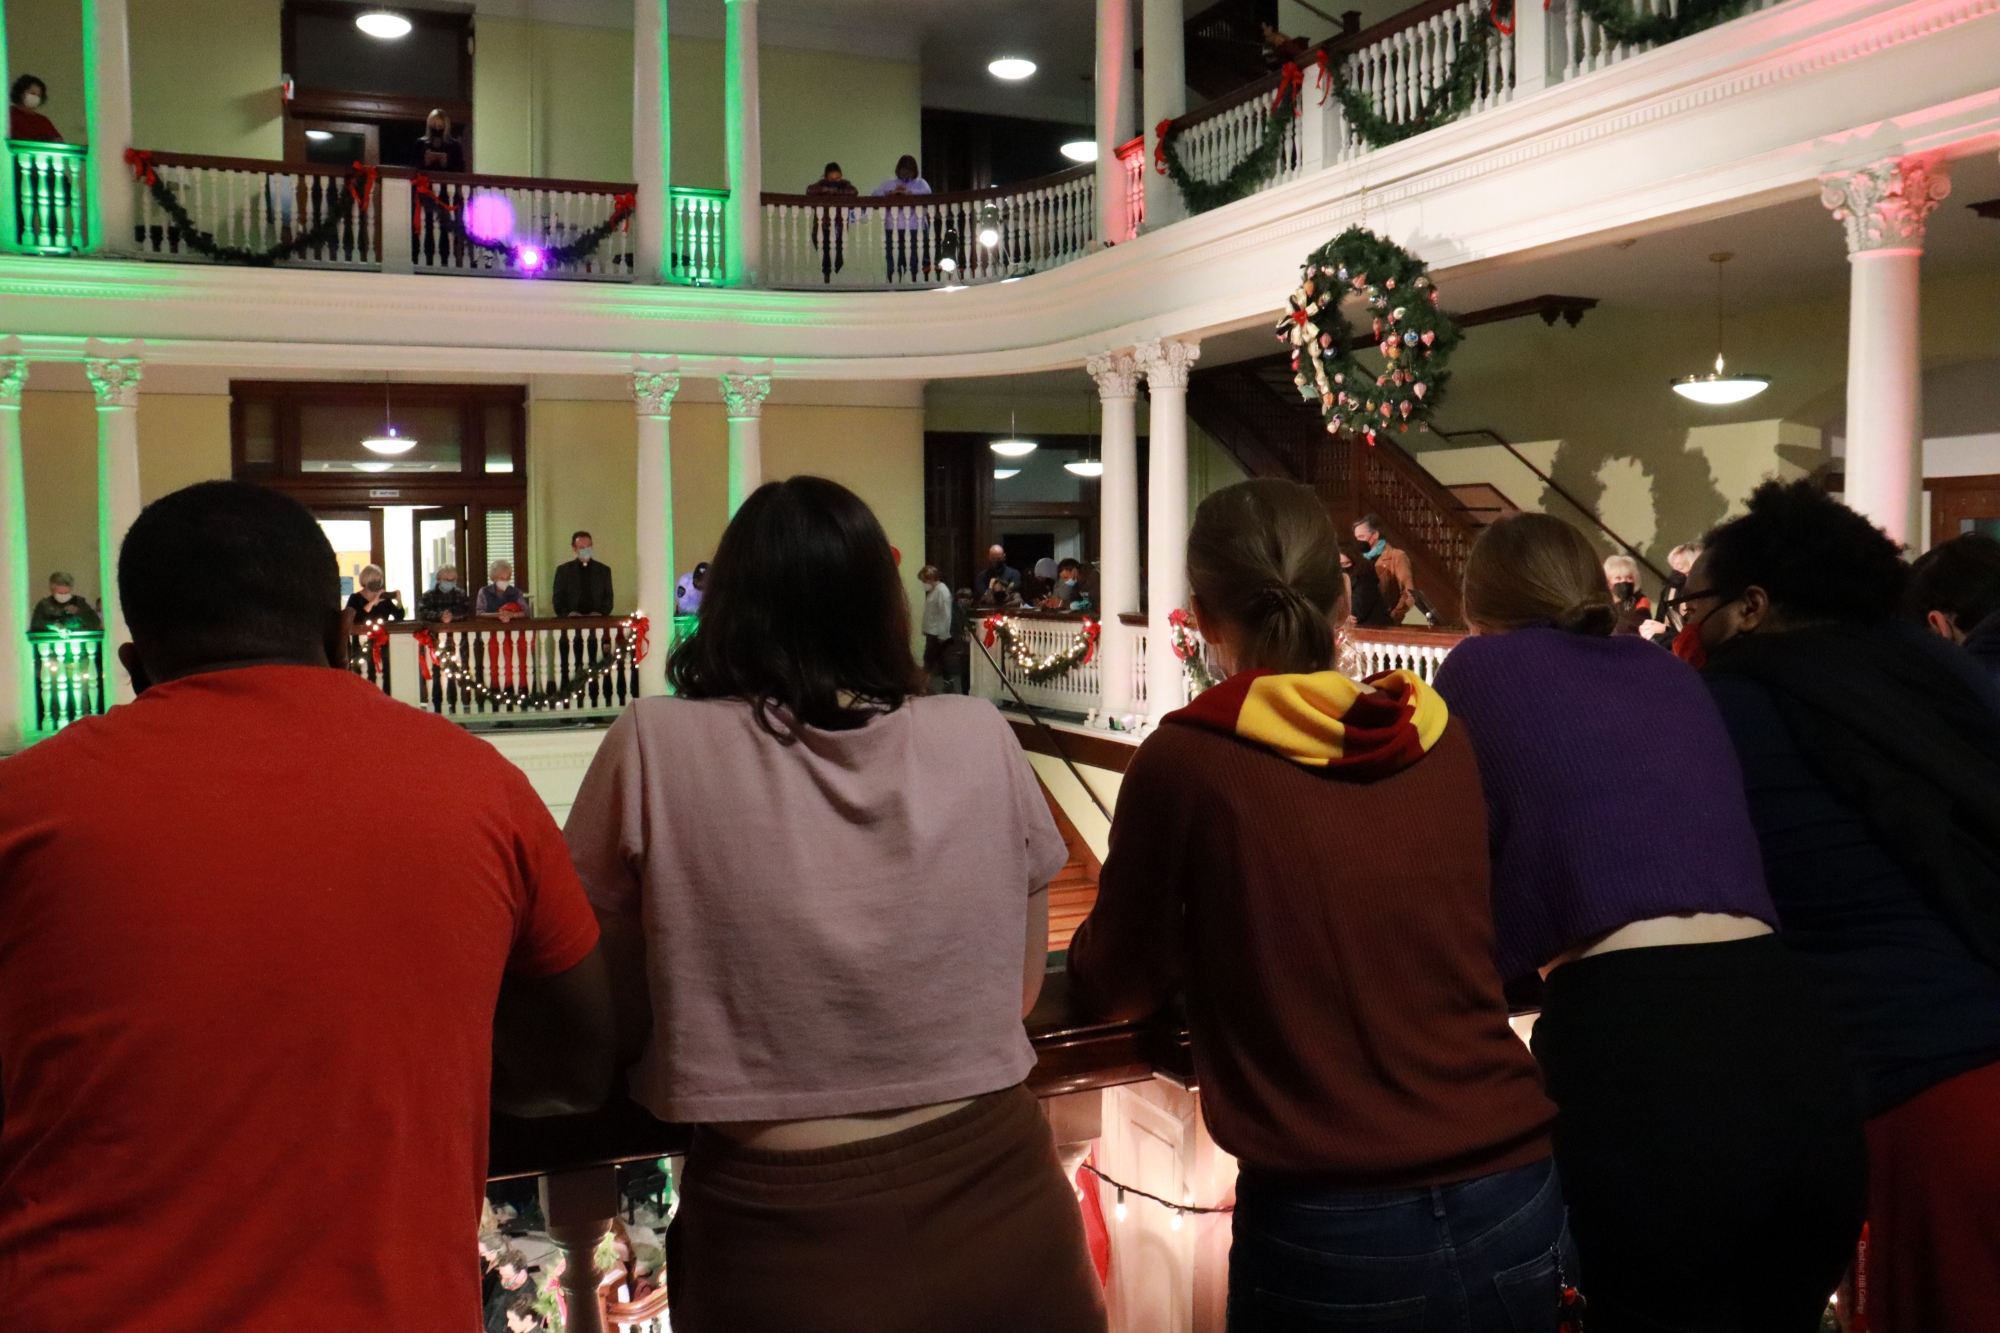 The Rotunda was packed as audience members took in the carols from all floors. 